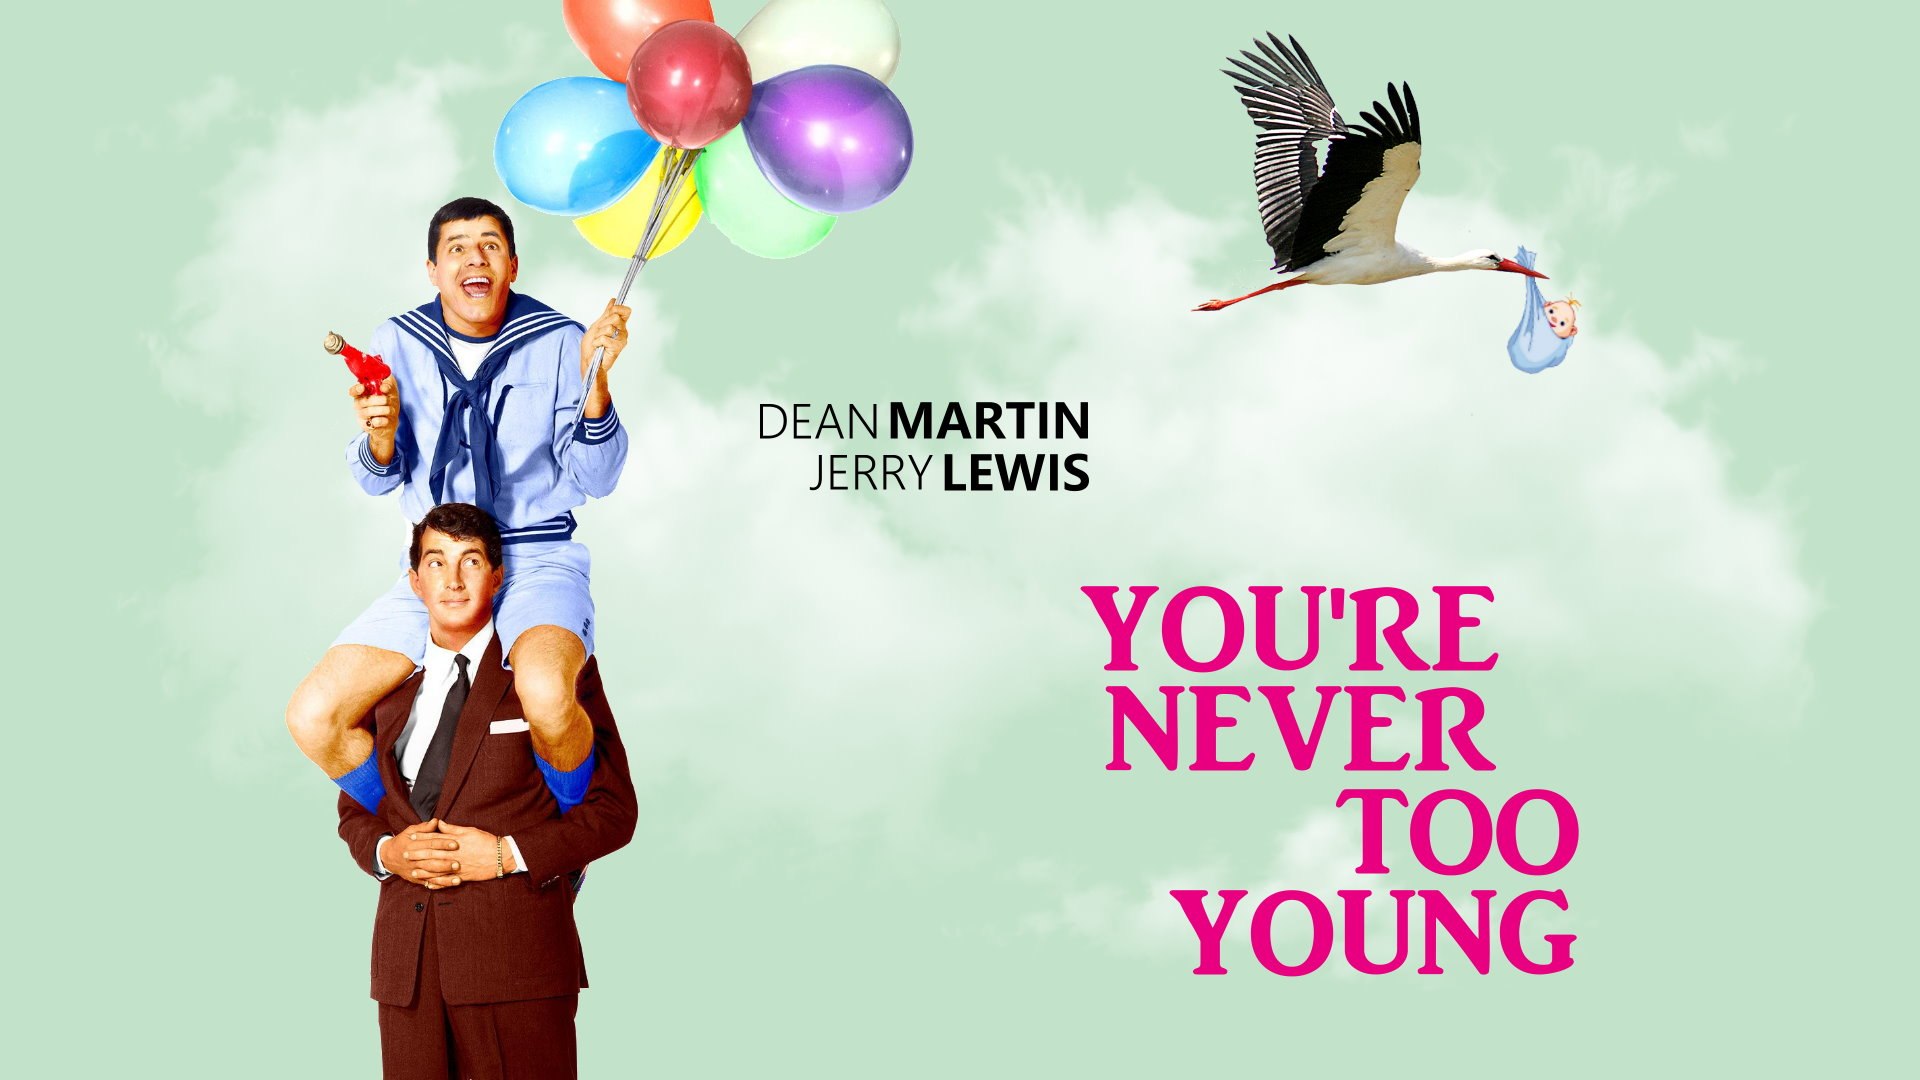 You’re Never Too Young 1955 Jerry Lewis Dean Martin Full Length Comedy Movie